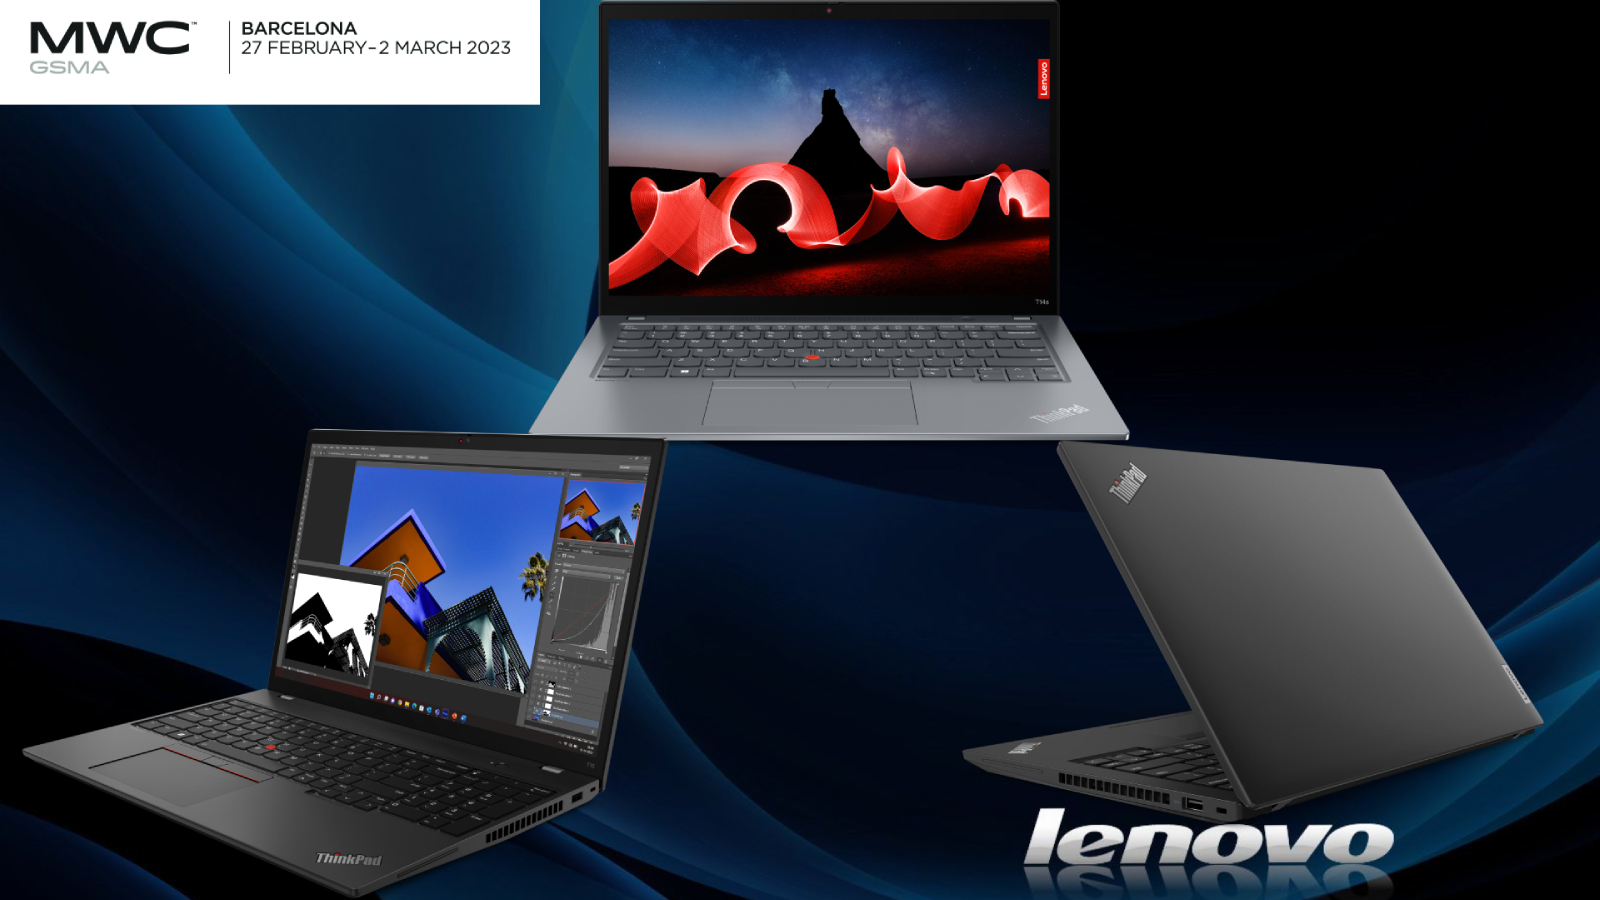 Lenovo launches new T-series ThinkPads at MWC 2023 | Laptop Mag